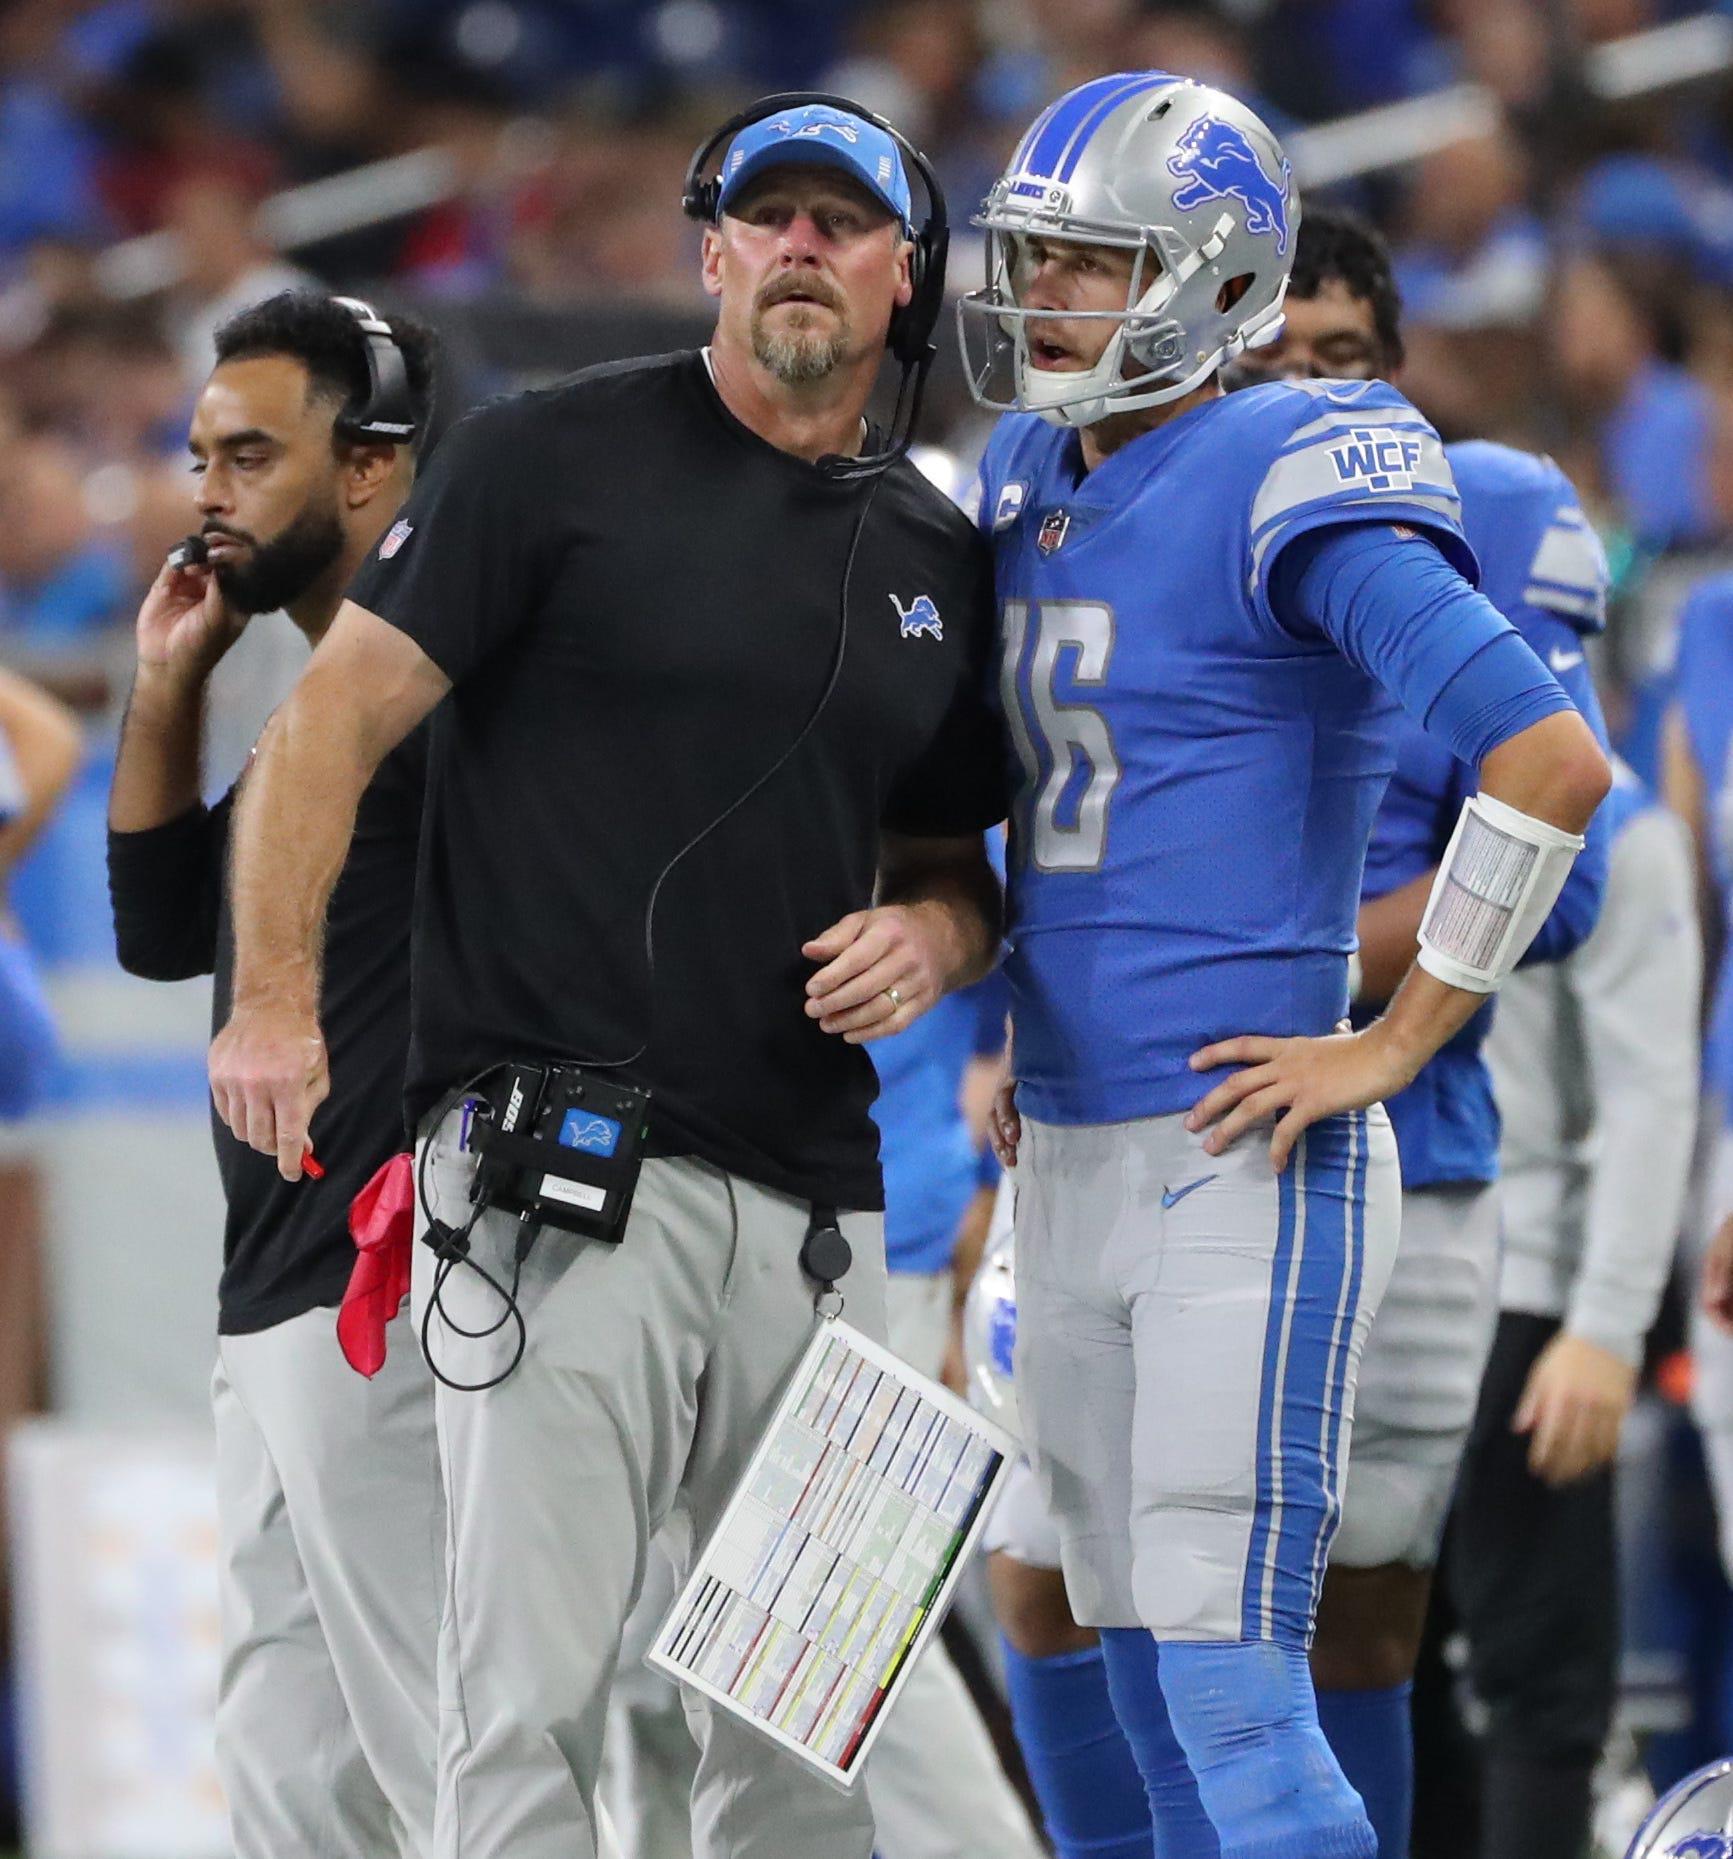 lions chance to make the playoffs